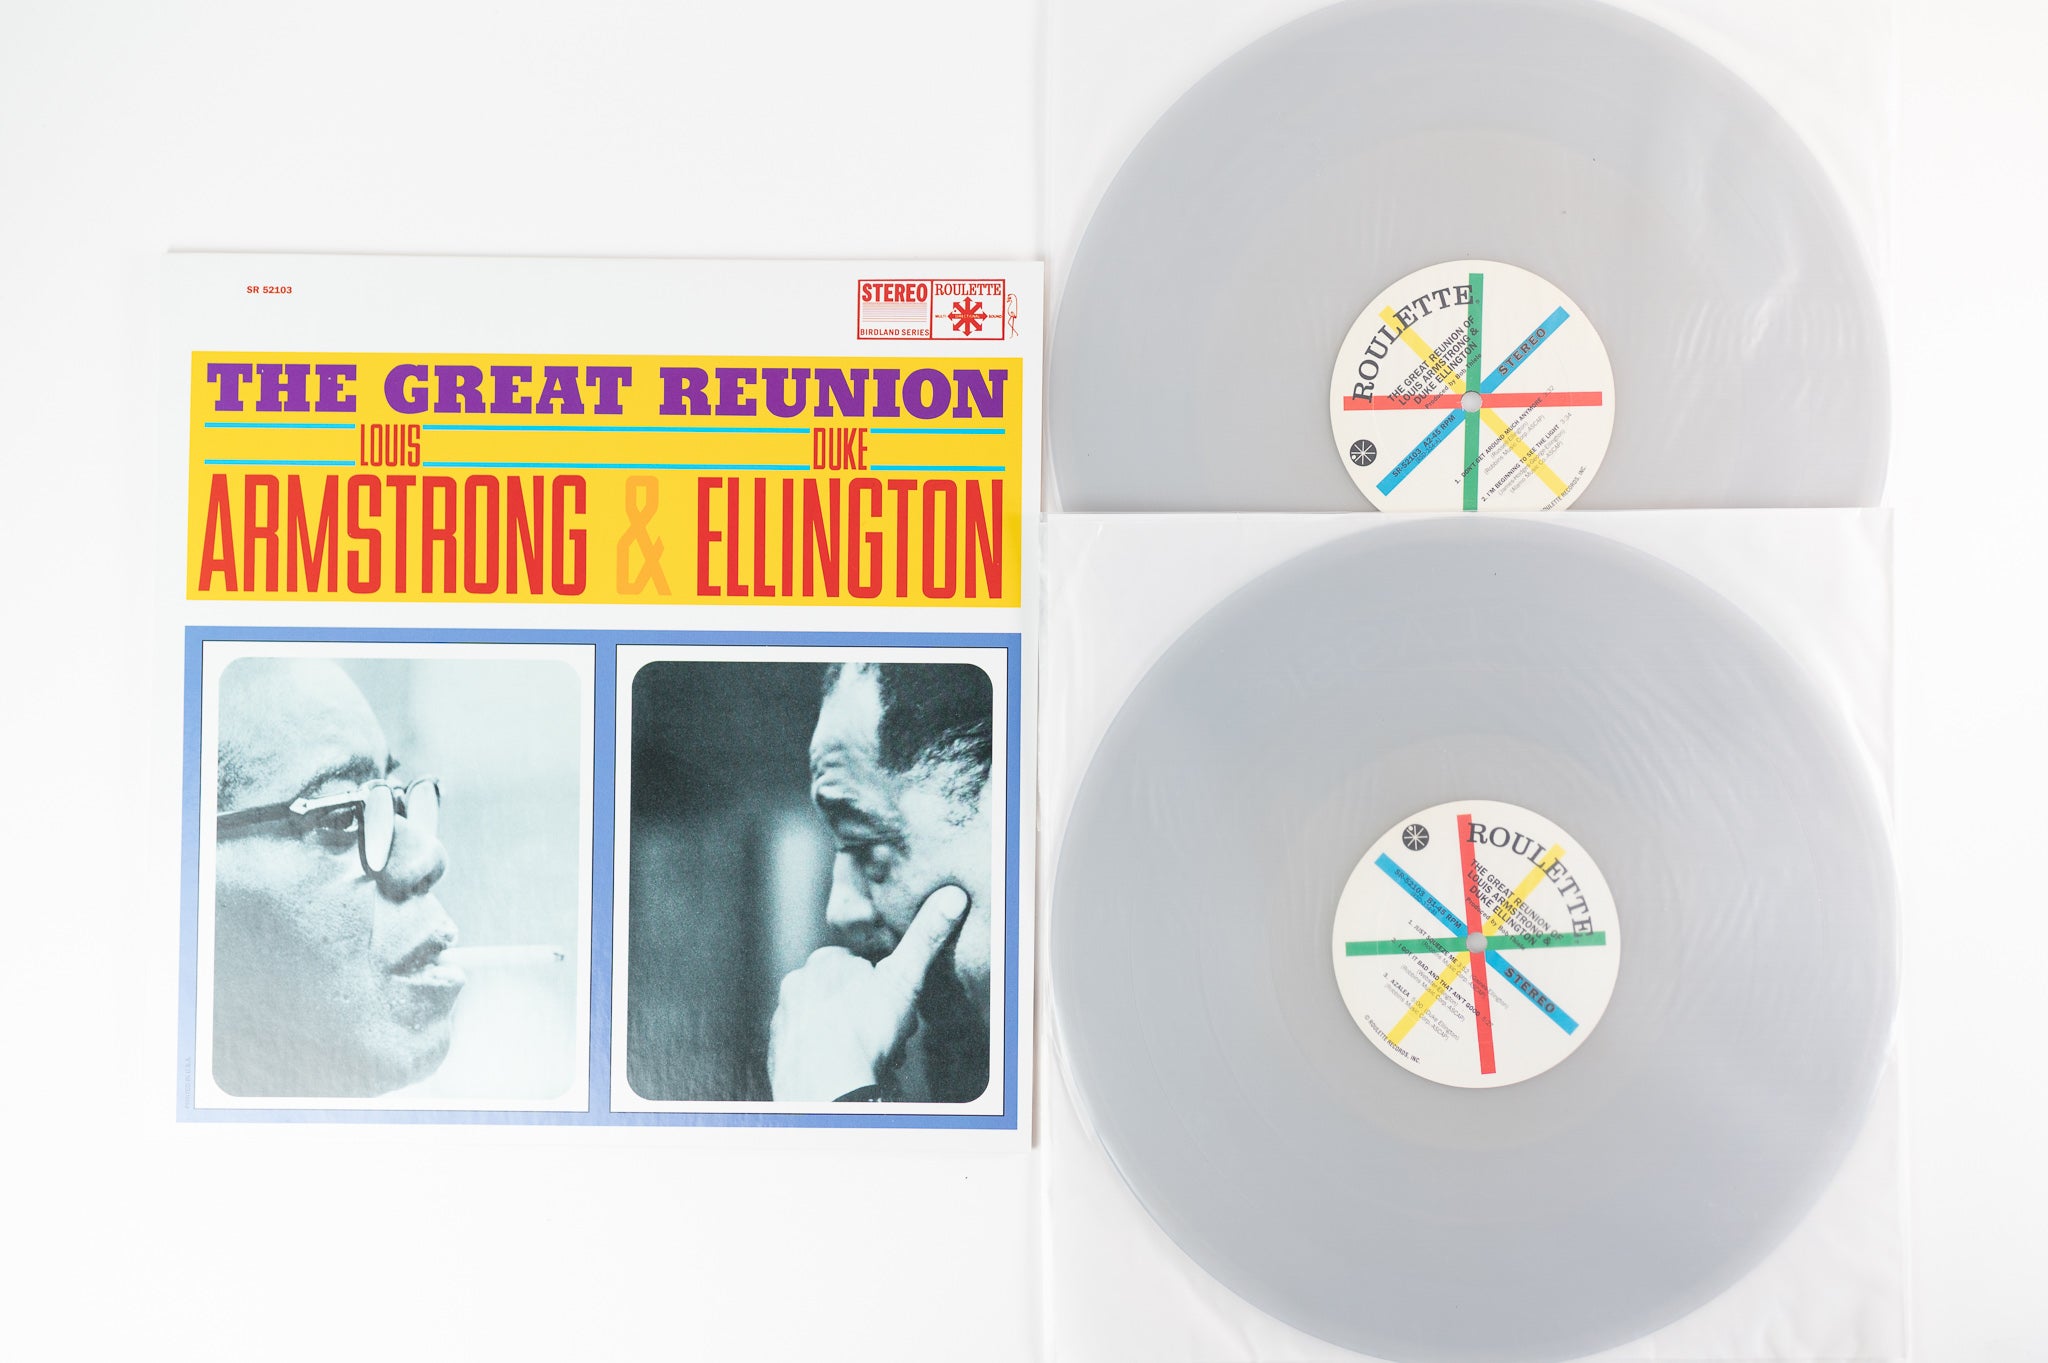 Louis Armstrong - The Great Reunion Classic Records 200 Gram Clear Vinyl Box Set